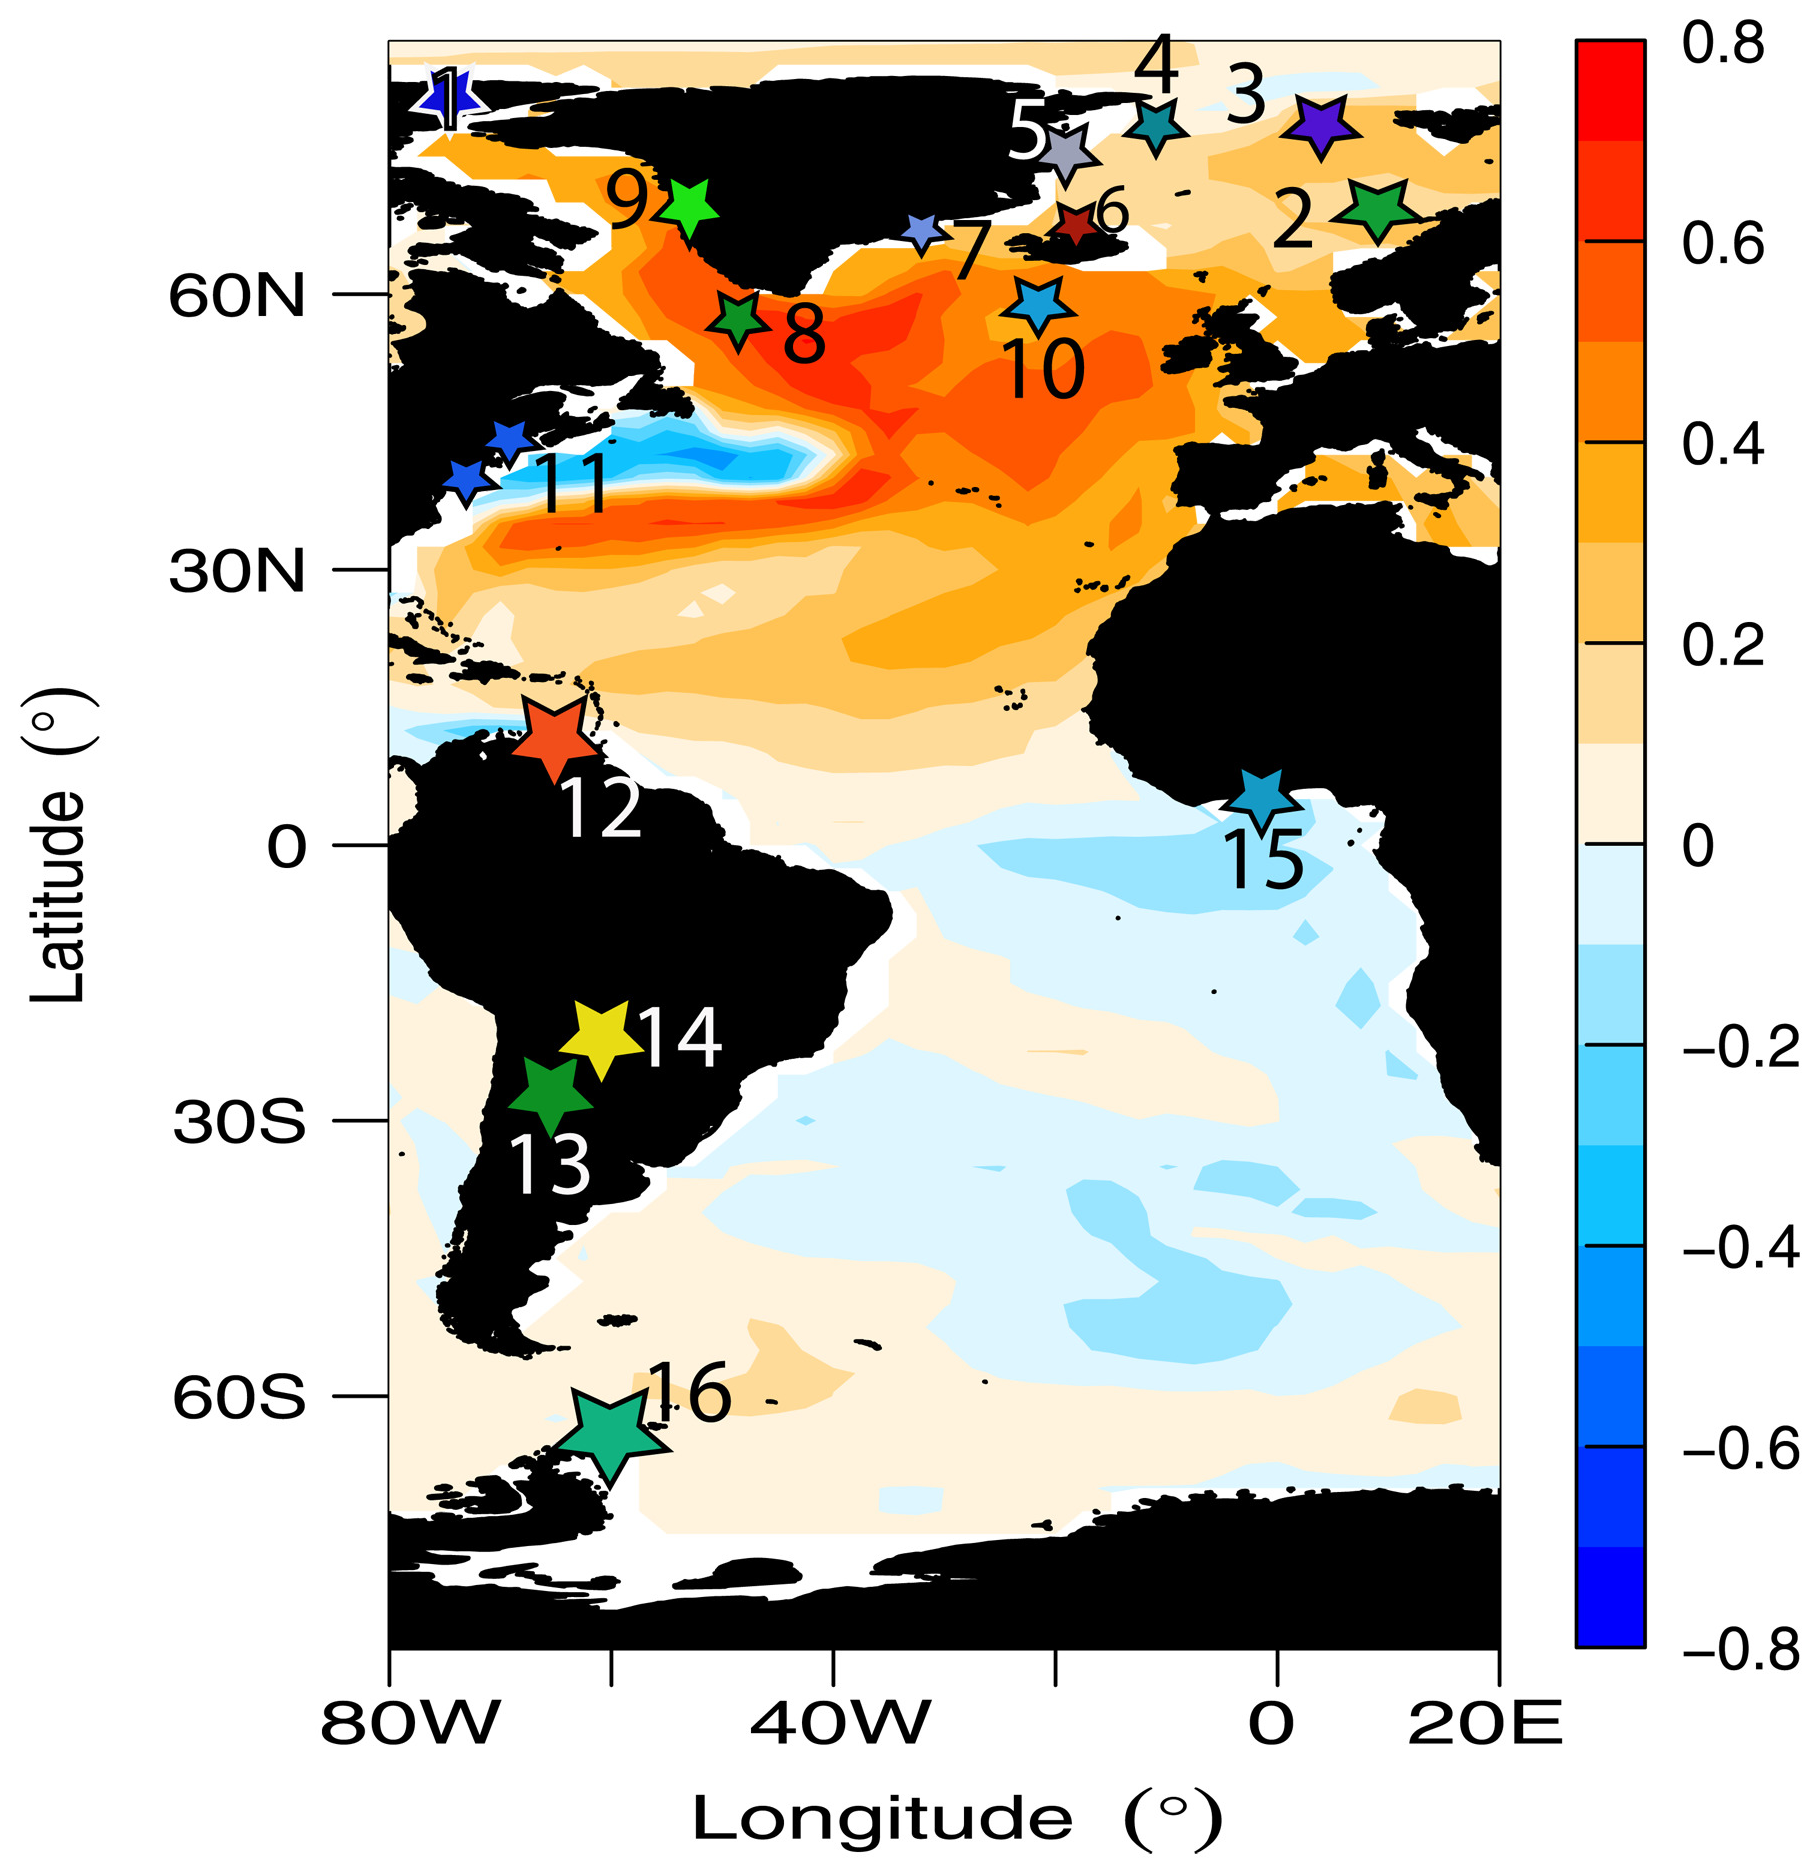 Atlantic Meridional Overturning Circulation (AMOC) sea surface temperature (SST) fingerprint. Multimodel mean correlation map between the low-frequency AMOC at 26°N and SST (12). Stars numbered 1 to 16 denote location of sites referred in the figures. The reconstructed AMV at South Sawtooth Lake (1), August temperature in Vøring Plateau off Norway (2), Eastern Fram Strait IRD (3), Atlantic water influence based on C. neoteresis in Western Fram Strait (4), East Greenland Strait N. labradorica (5), North Icelandic shelf temperature based on δ18O from bivalve shells (6), IRD in Denmark Strait (7), the RAPiD-35-COM δ18O T. quinqueloba (8), percentage of Atlantic species in Disko Bugt (9), the RAPID-21-COM sortable silt in the ISOW (10), Gulf of Maine reconstructed SST from bivalve shells (11), titanium (%) in the Cariaco Basin (12), Quelccaya ice record δ18O (13), Huagapo speleothem δ18O (14), and Lake Bosumtwi lake level inferred from δ18O (15). The James Ross Island ice core record with annually resolved δD is shown (16). Graphic: Lapointe and Bradley, 2021 / Science Advances